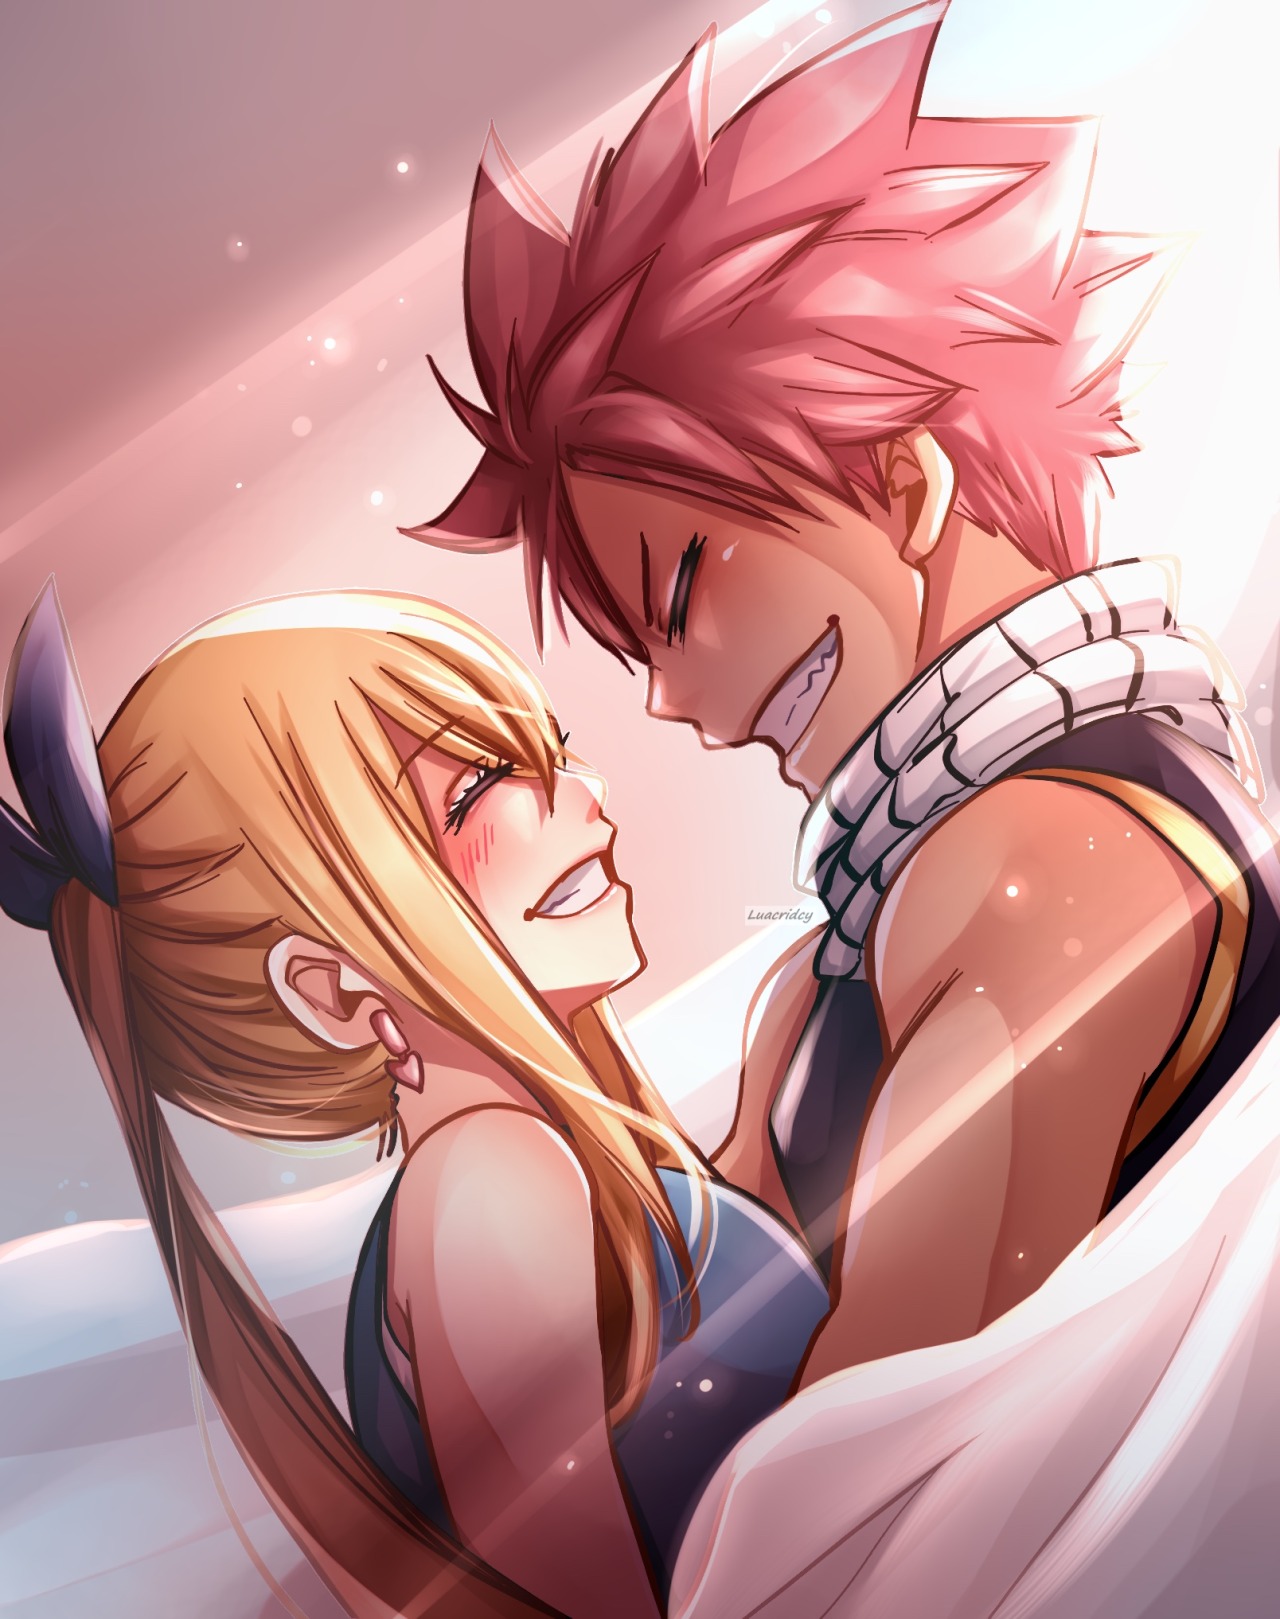 Natsu and lucy fanfiction love